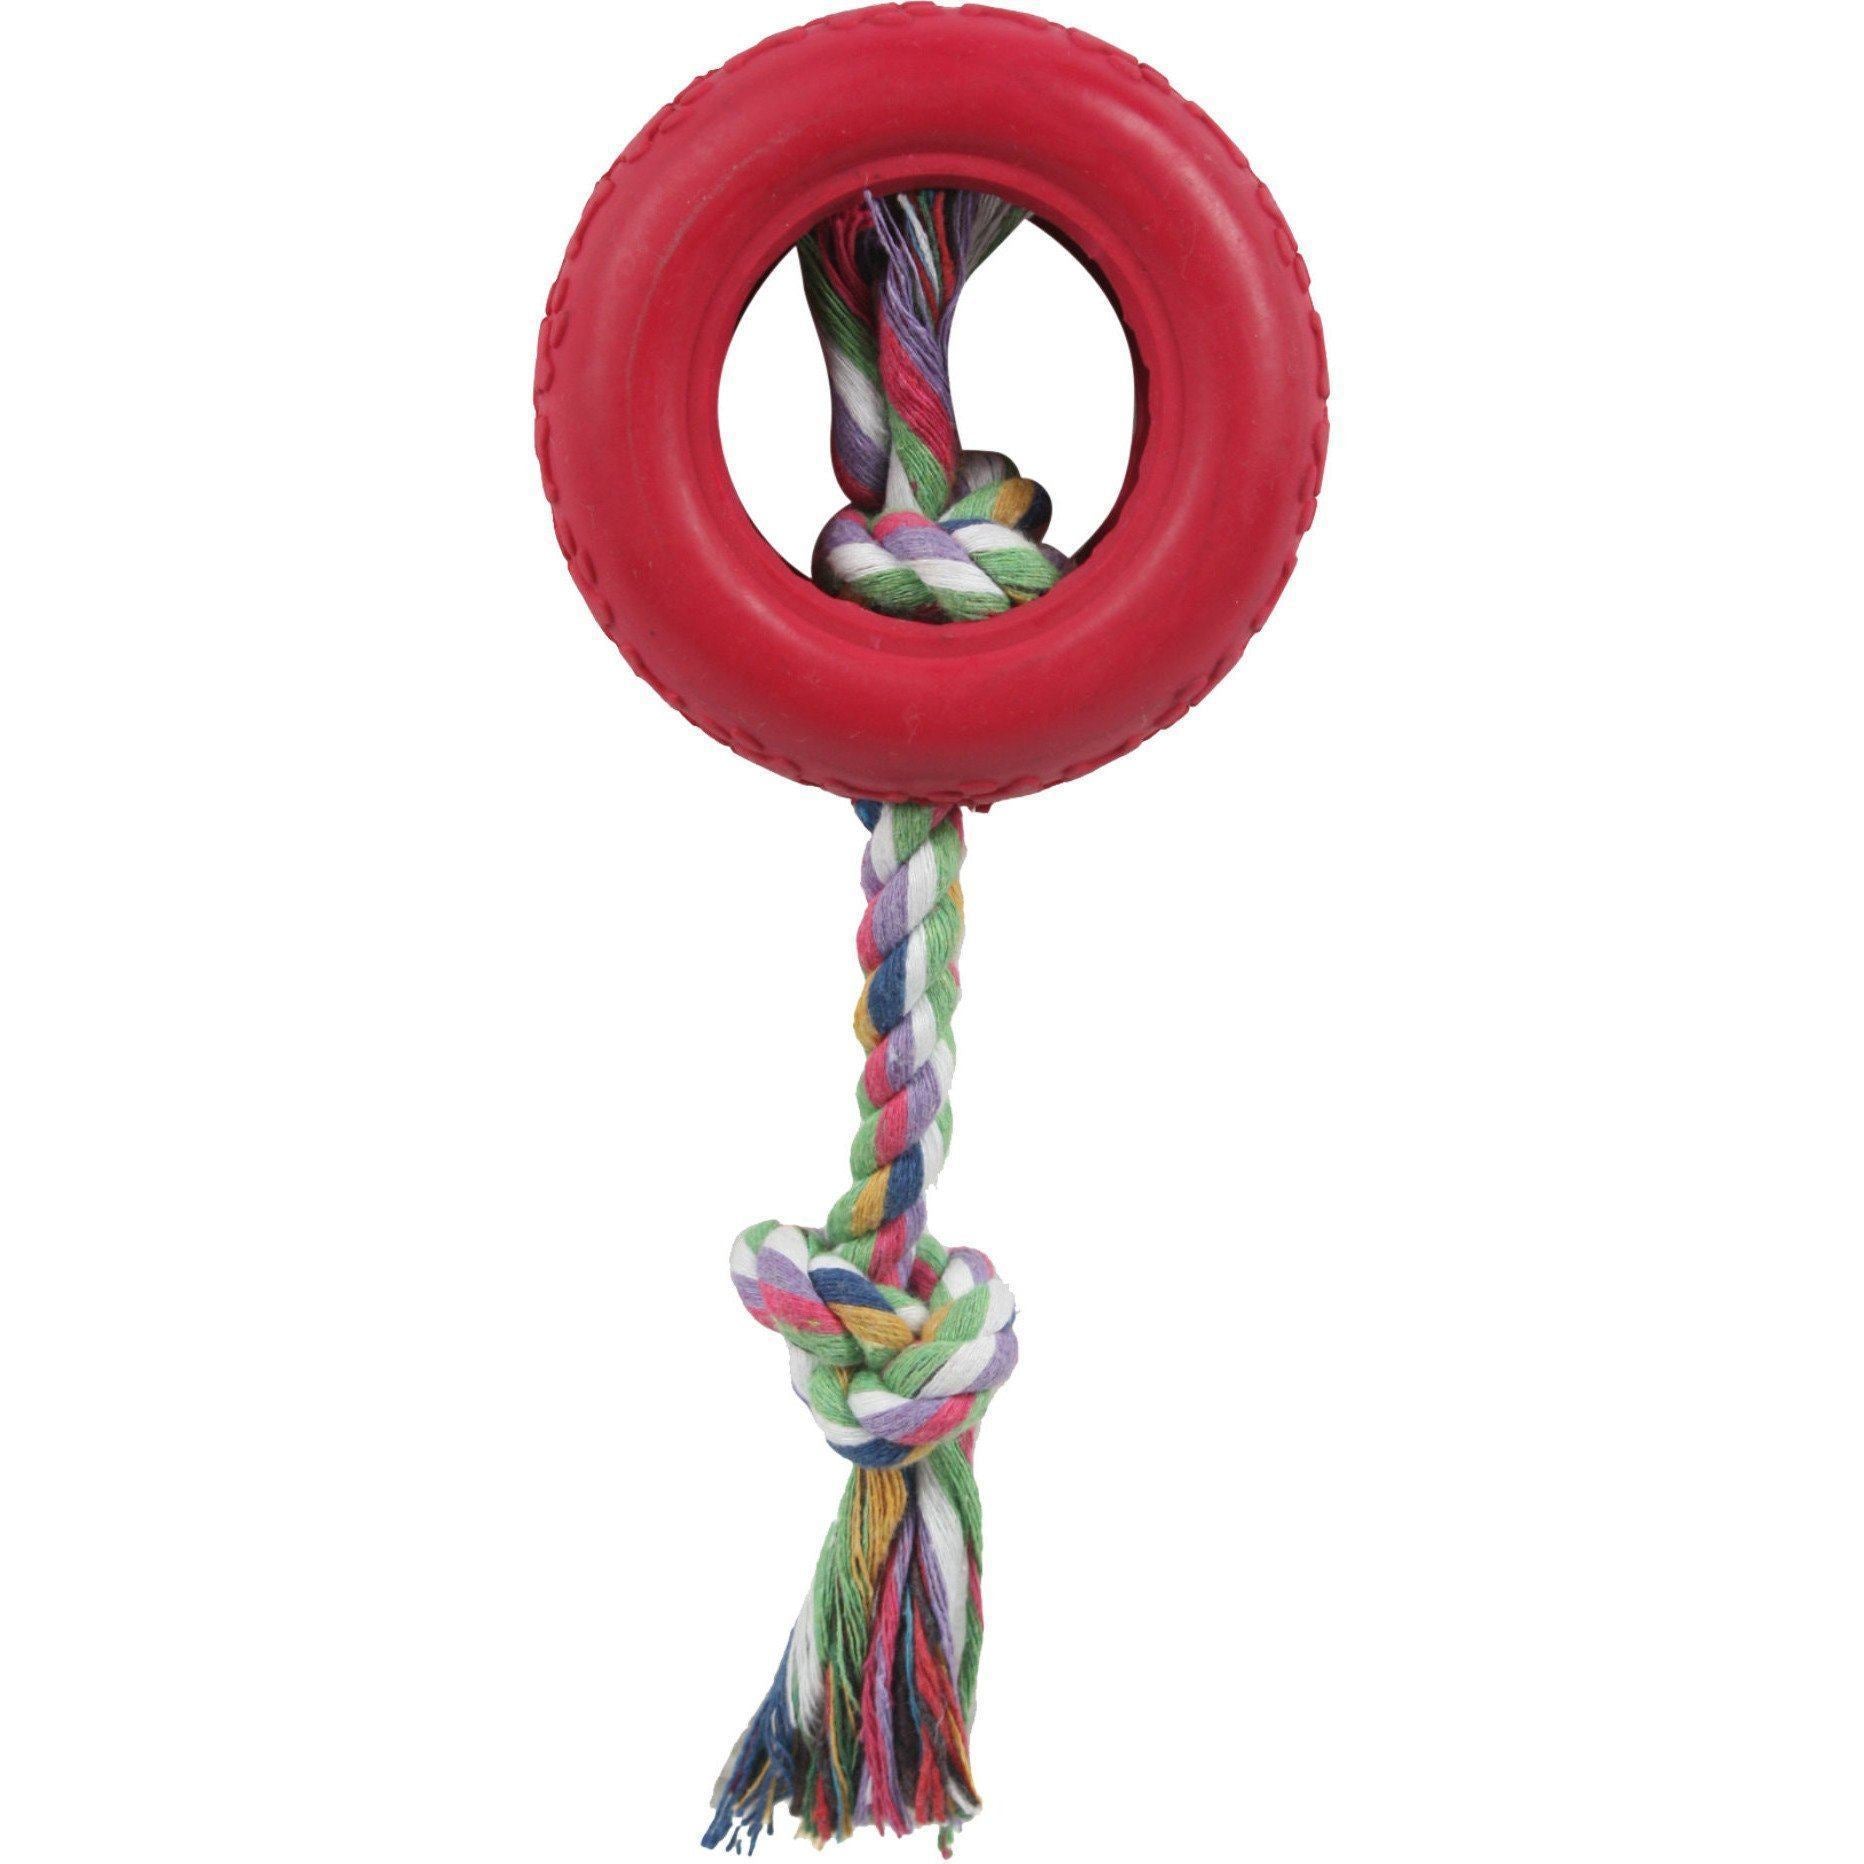 Pet Life ® Rubberized Chew Jute Rope and Tire Pet Dog Toy Red 